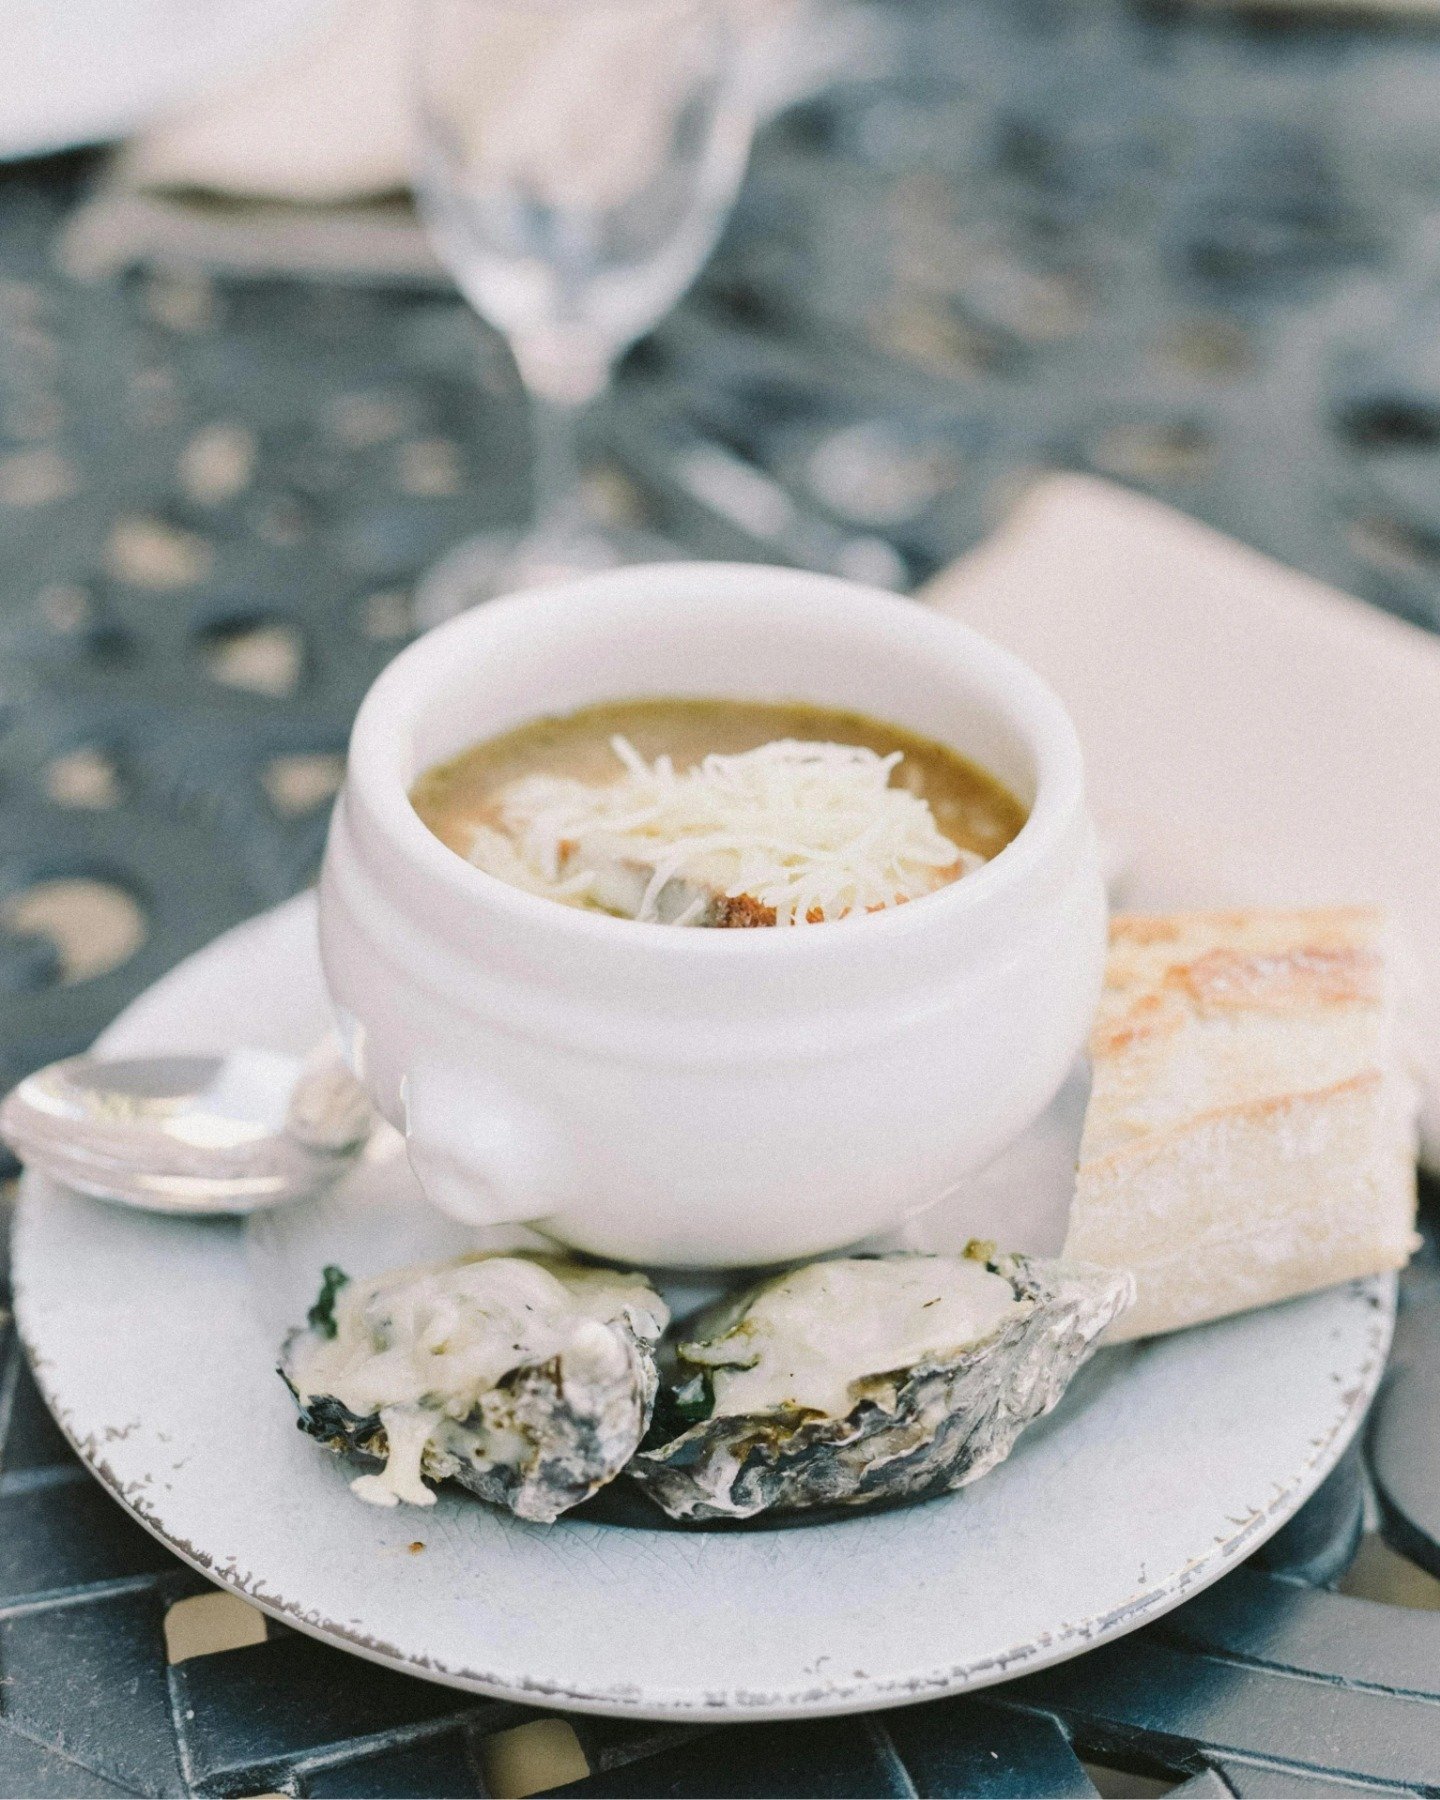 Now that's fancy! Elevate your dining experience with the decadent indulgence of oysters. From their briny essence to their elegant presentation, each bite is a taste of sophistication. Treat yourself to the finer things in life and savor the luxurio